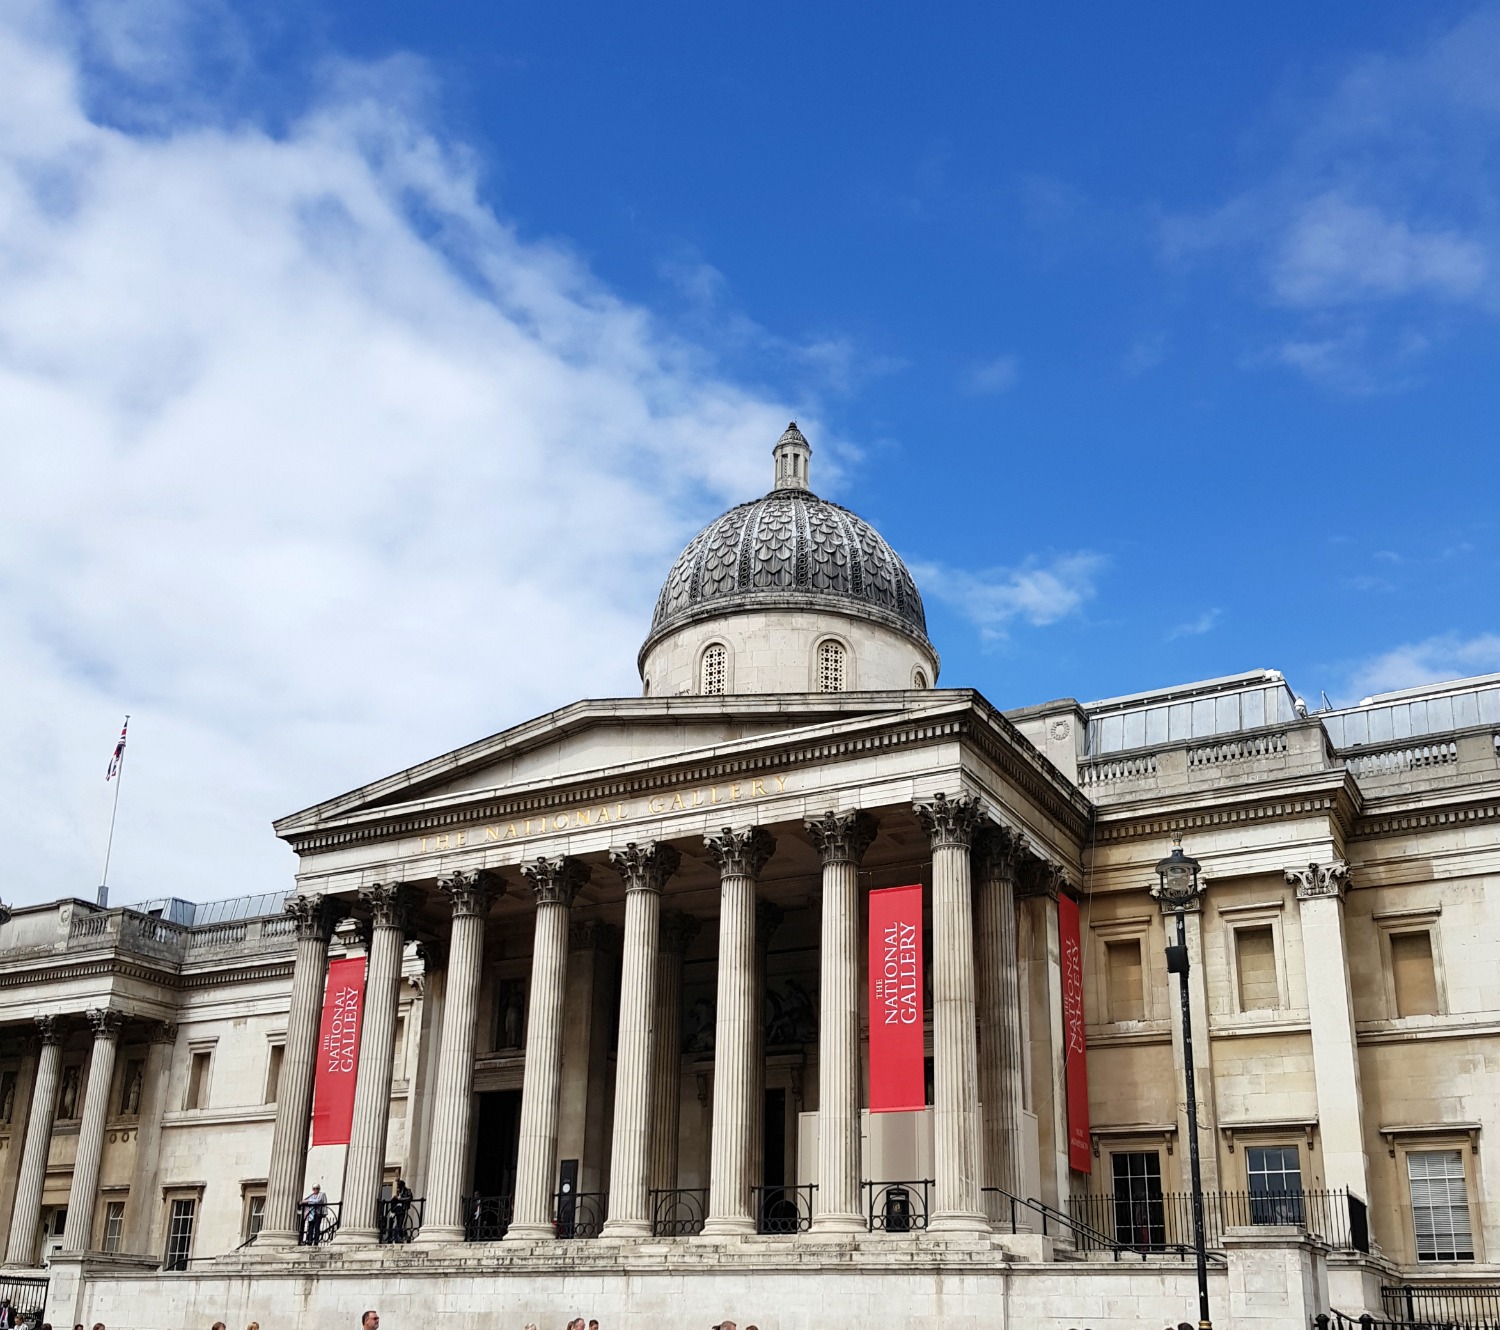 The exterior of the National Gallery in London, seen from Trafalgar Square against a blue sky - one of the many free museums in London for a day out with kids